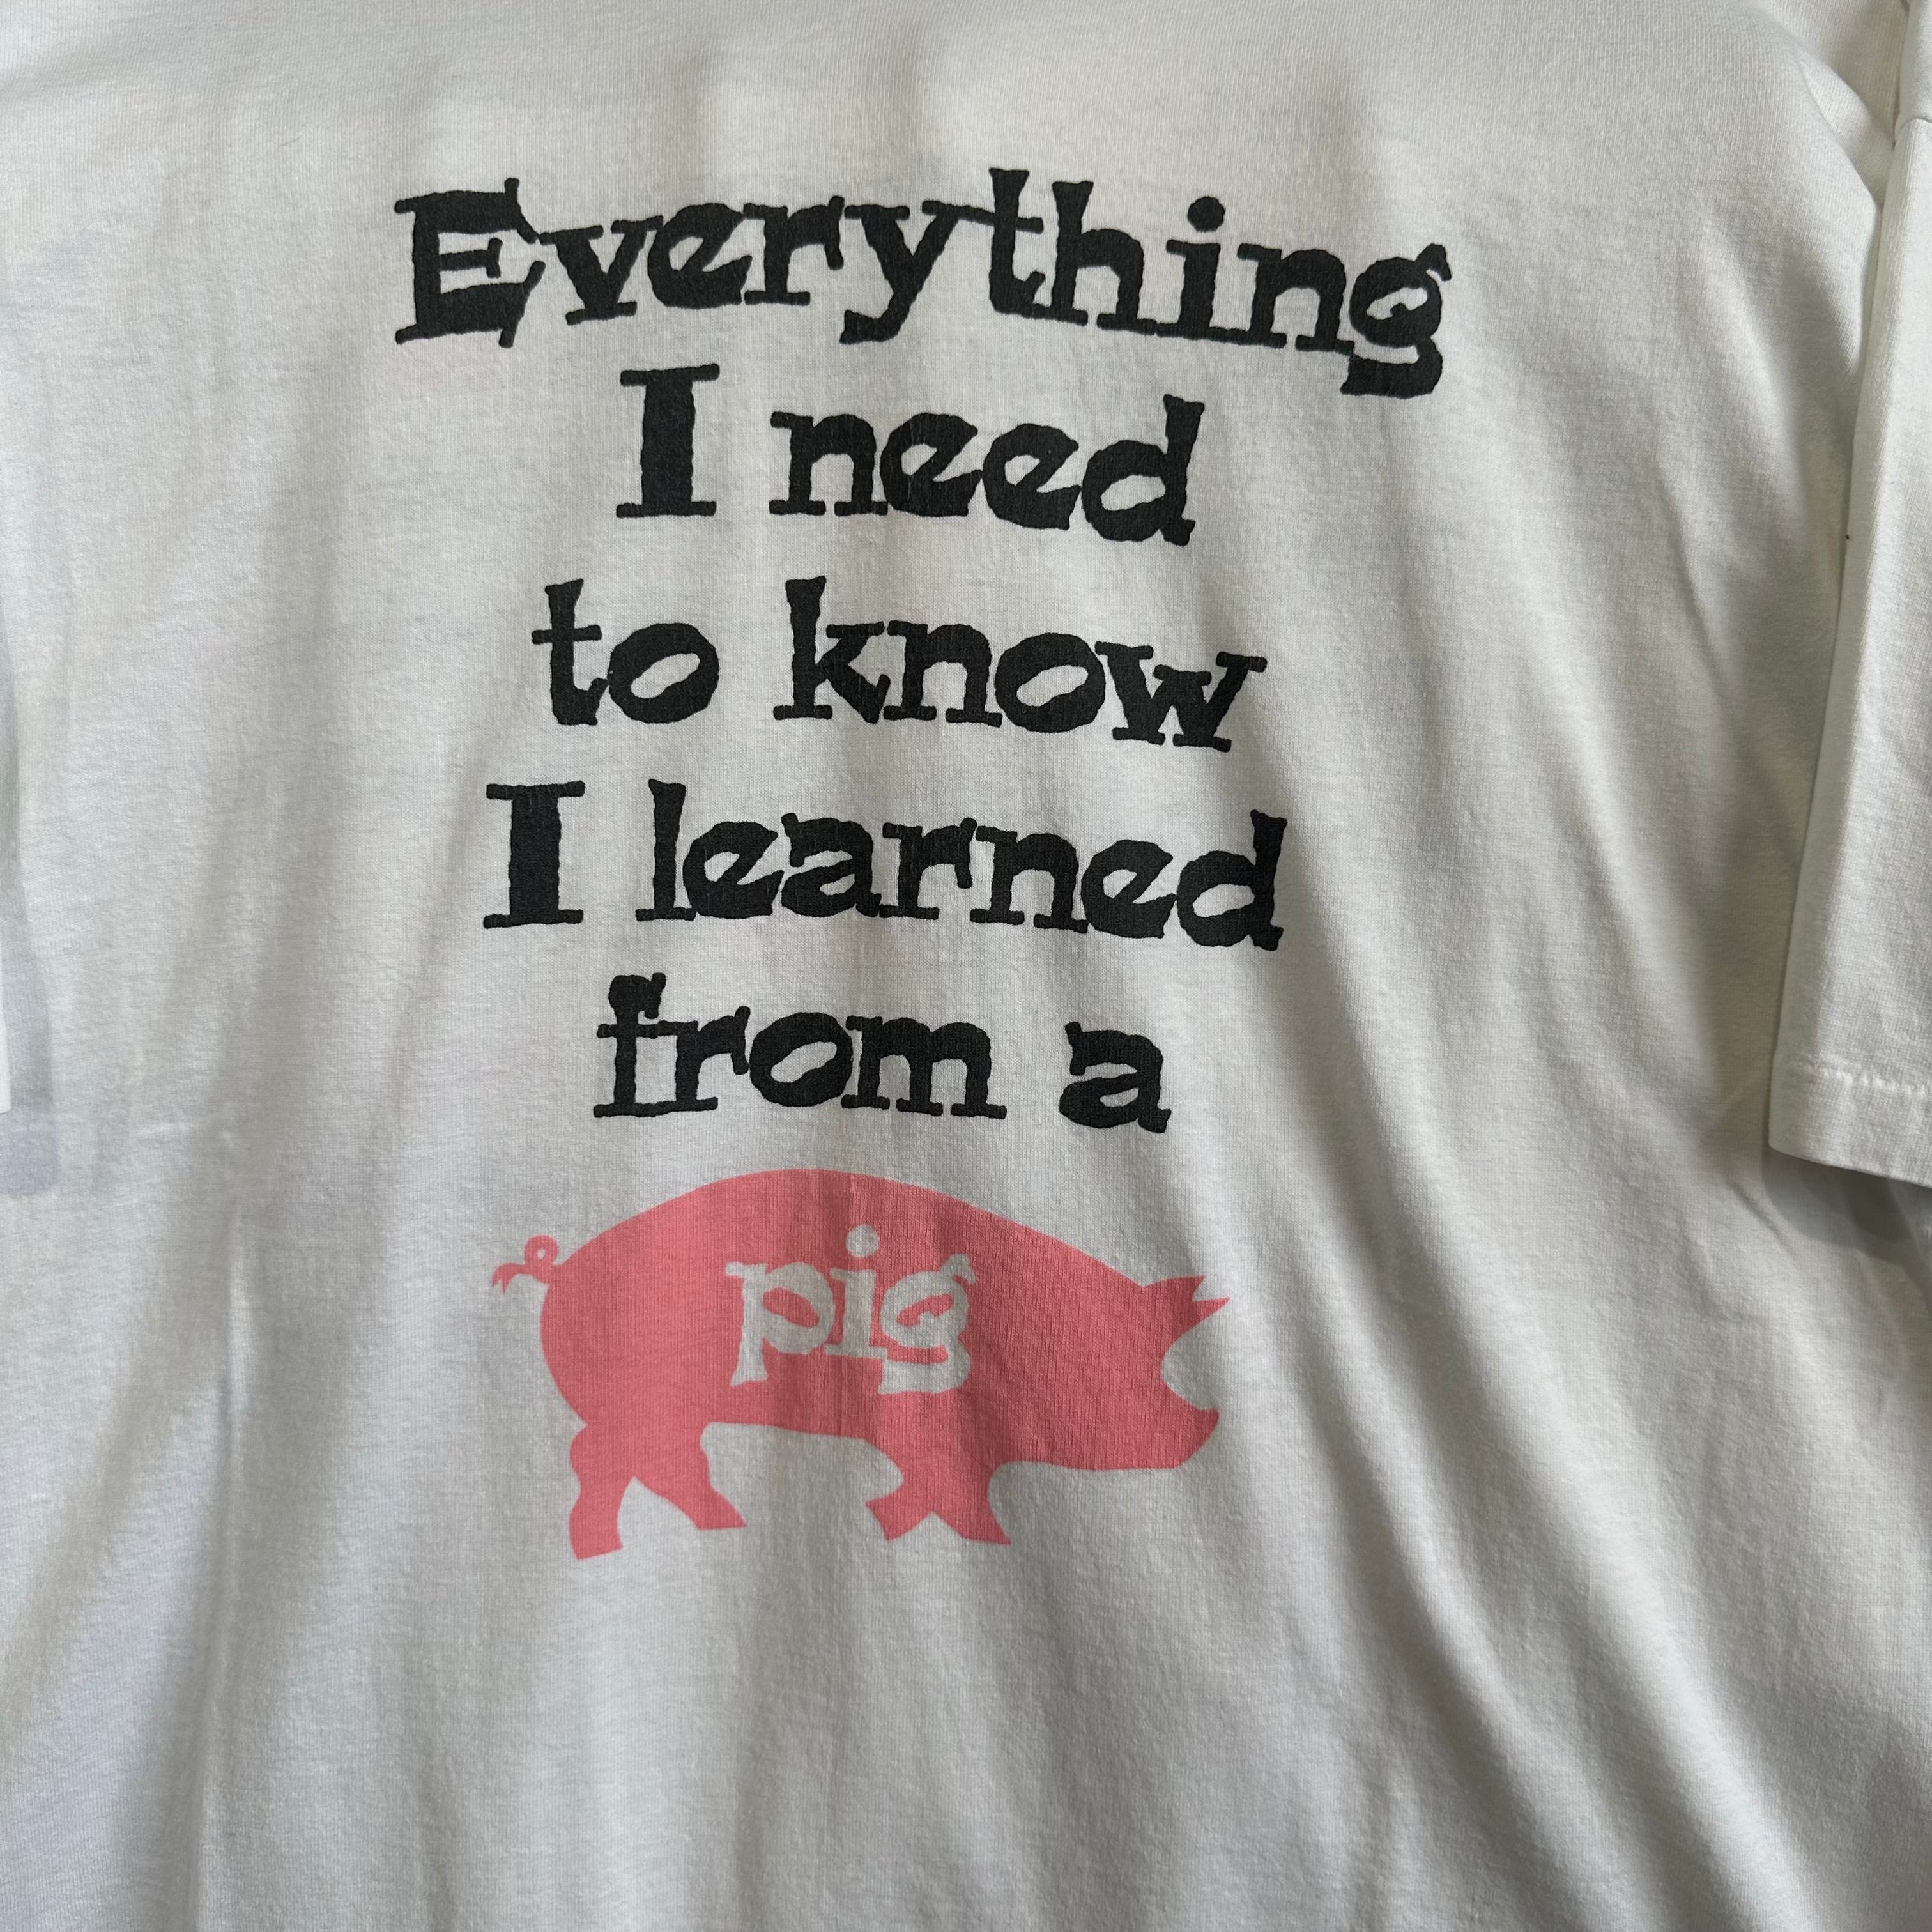 I Learned from a Pig T-Shirt